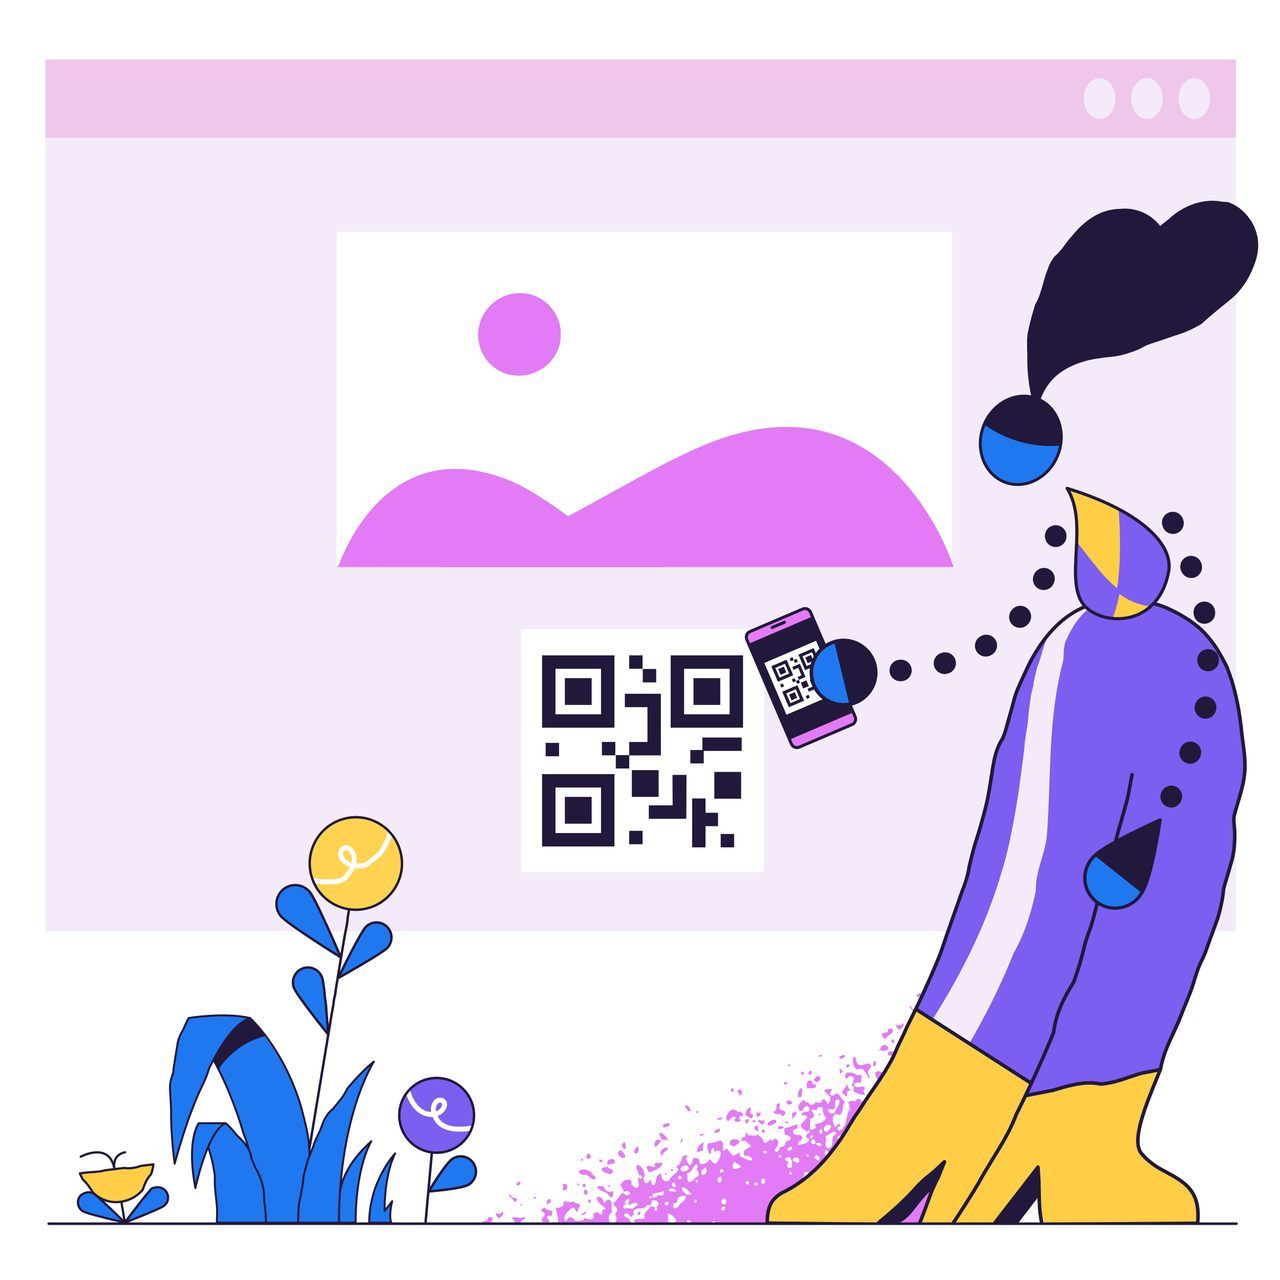 QR Code Usage Areas for Businesses and QR Code Generator Tools